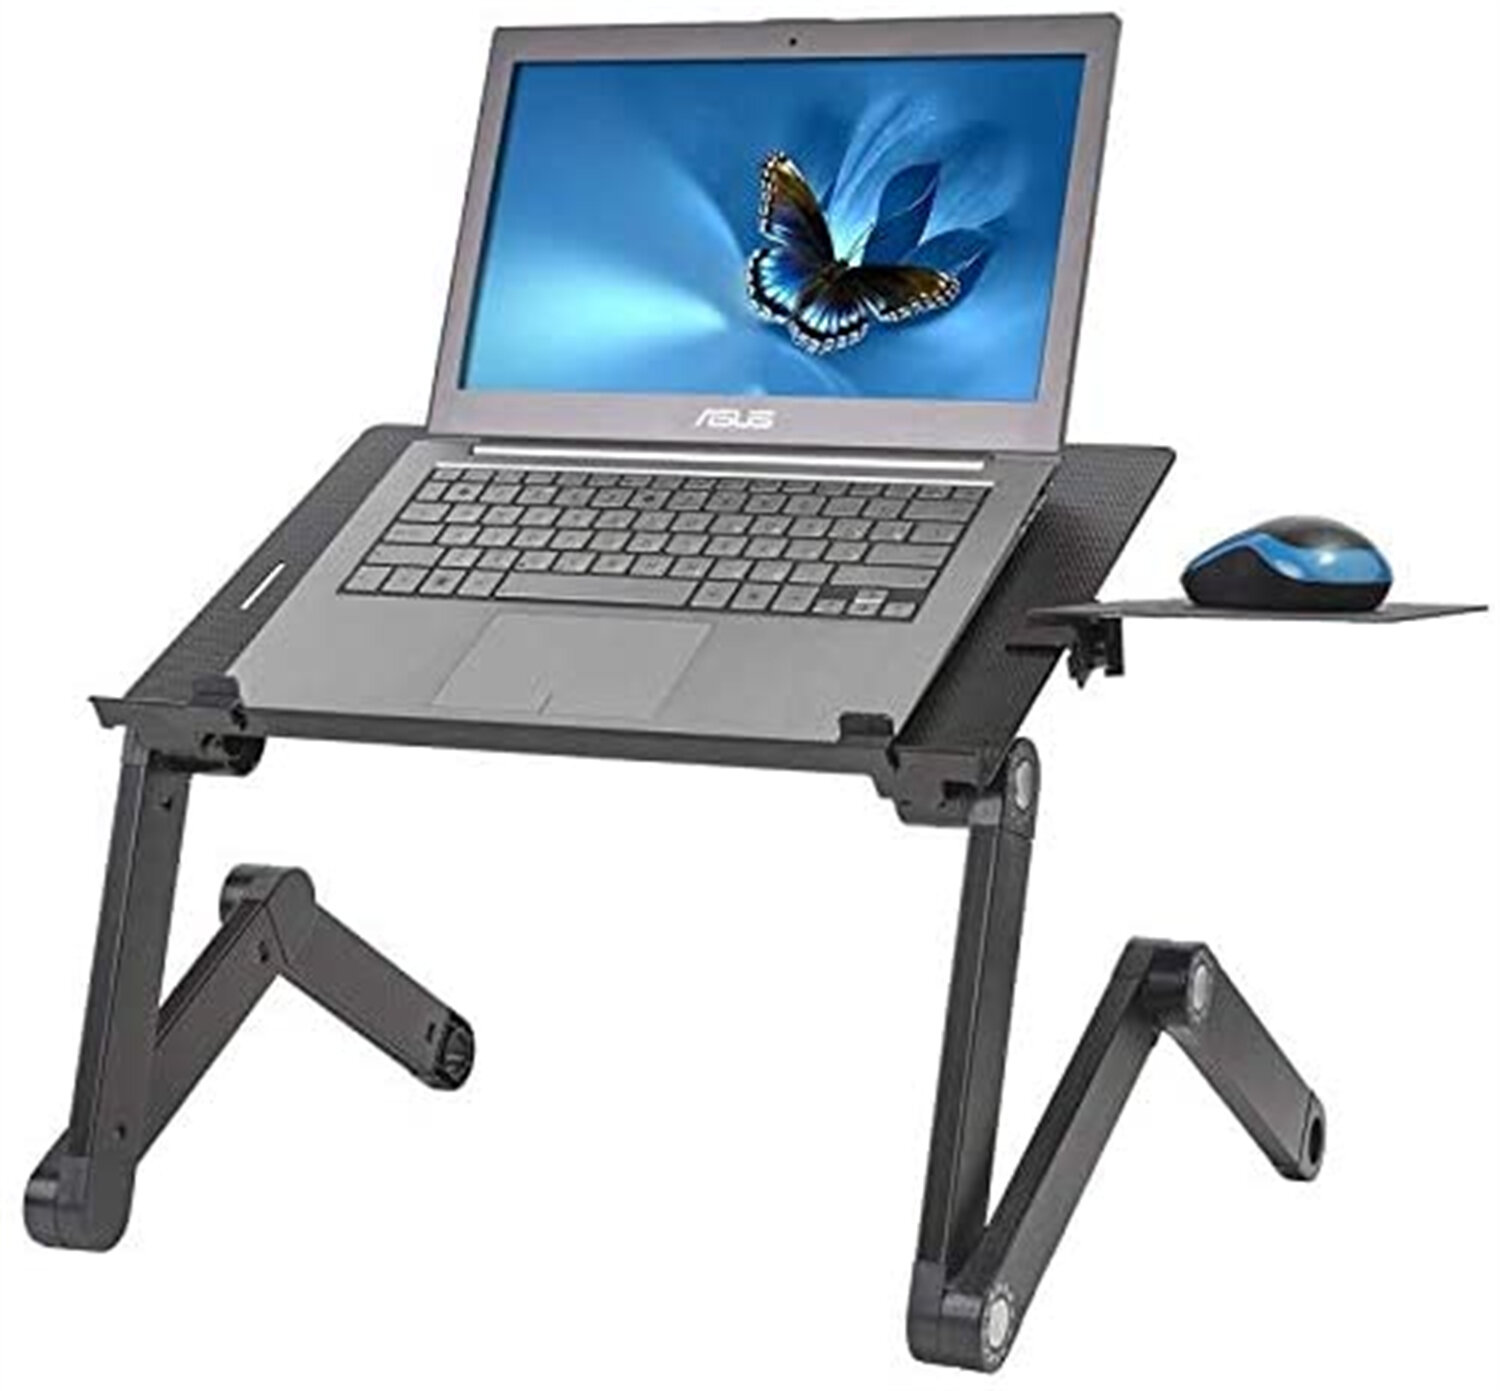 Adjustable Foldable Laptop Desk Table Stand Aluminum Alloy Bed Tray W/ Mouse Pad 